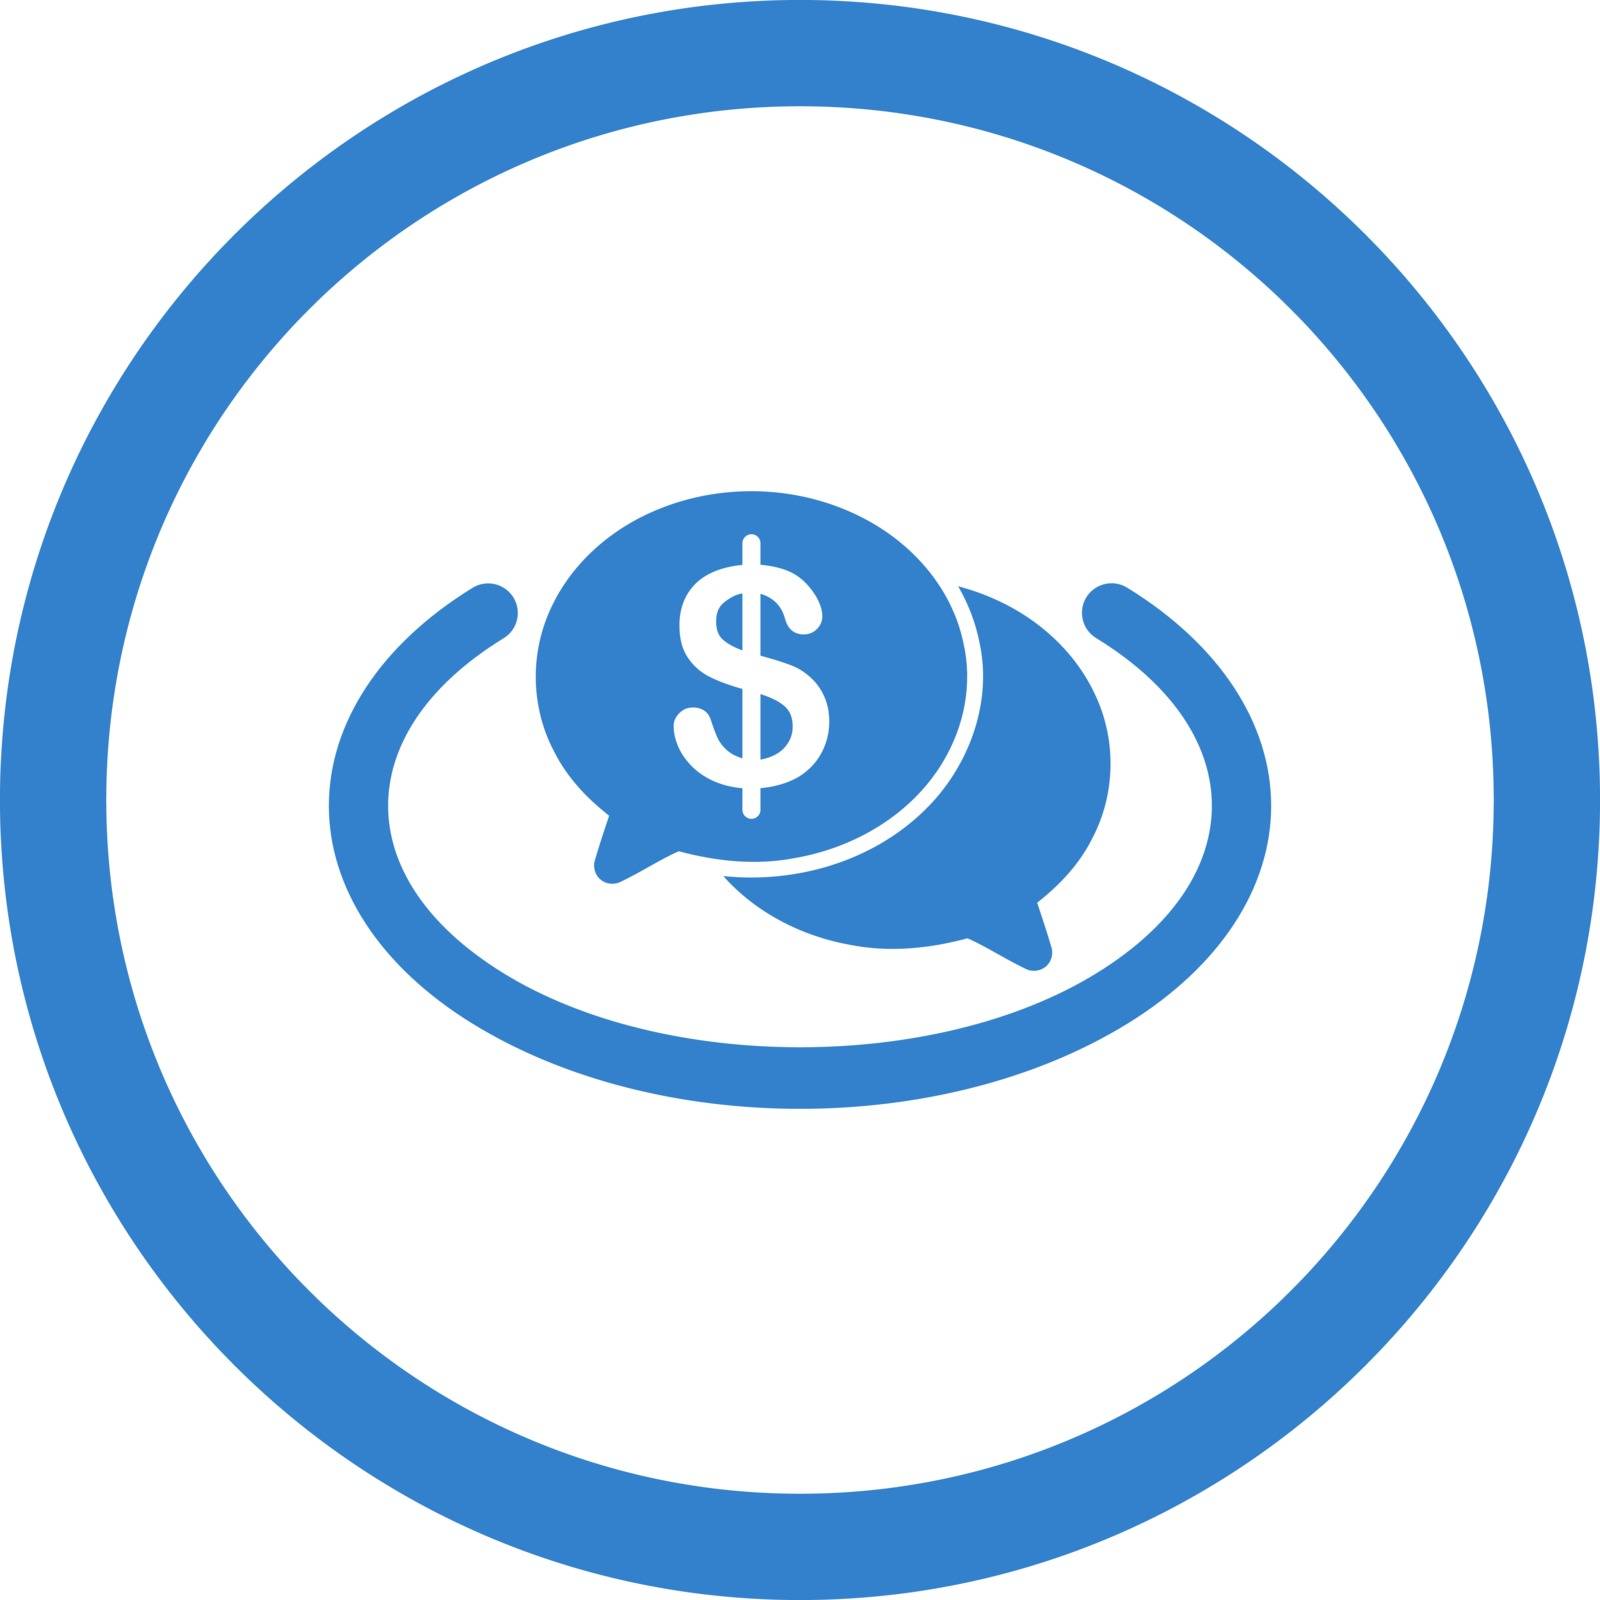 Financial Network vector icon. This flat rounded symbol uses cobalt color and isolated on a white background.